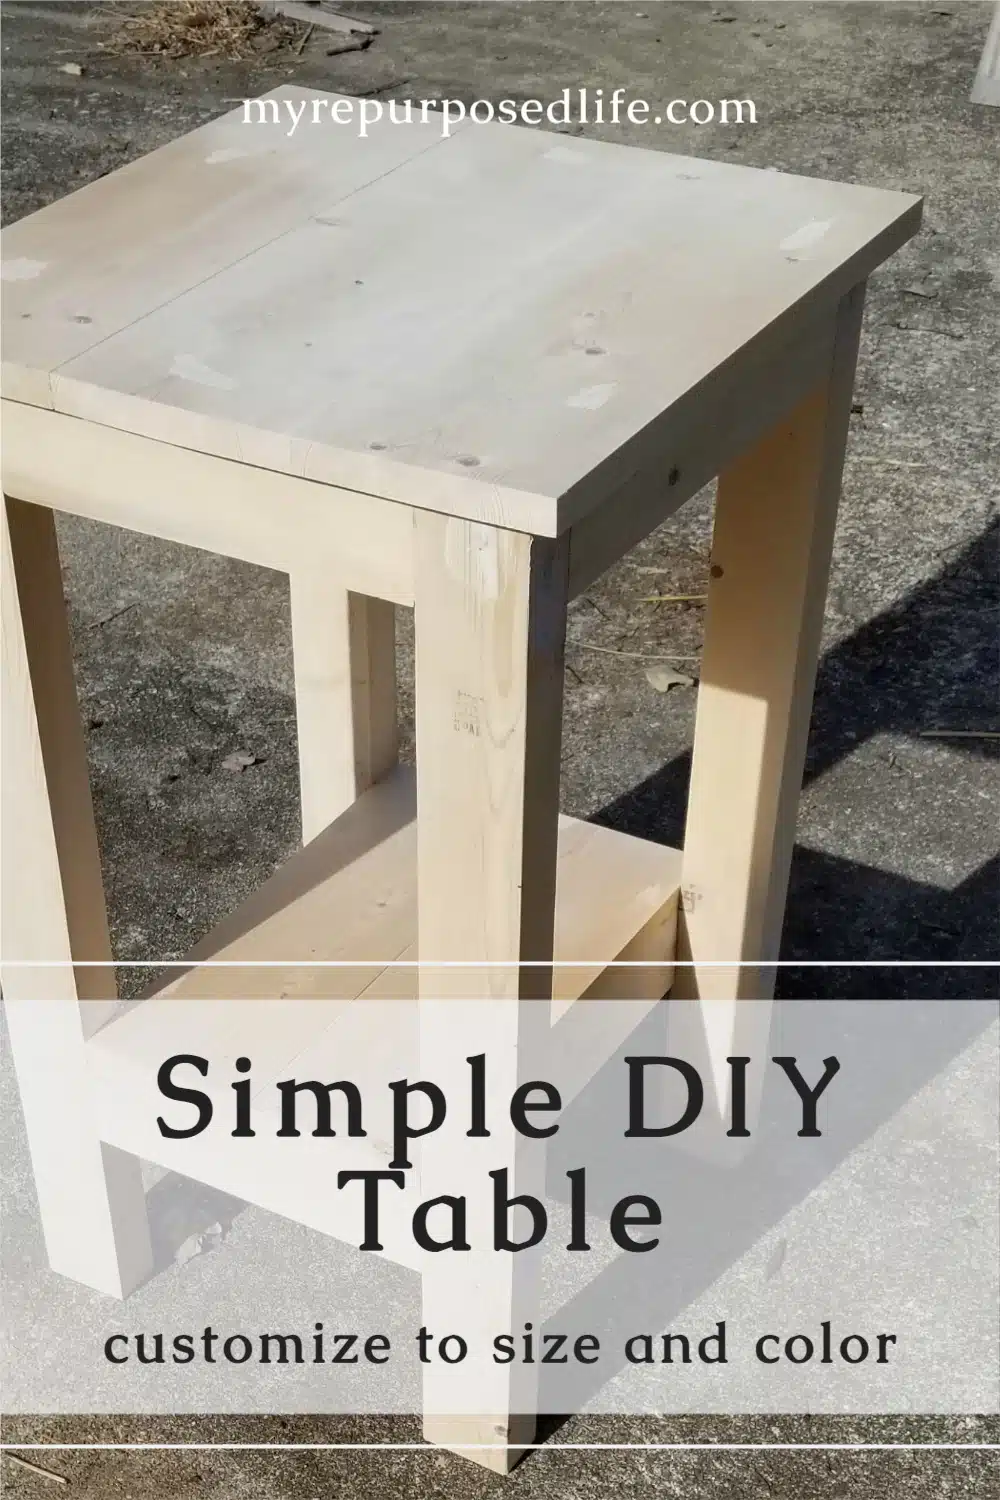 Simple Table DIY Using scrap wood left over from another large DIY project I made this small table for a friend's aunt. She needed something to hold her printer and paper. This fit the bill perfectly and she LOVES it! #myrepurposedlife #table #simple #build #scrapwood via @repurposedlife